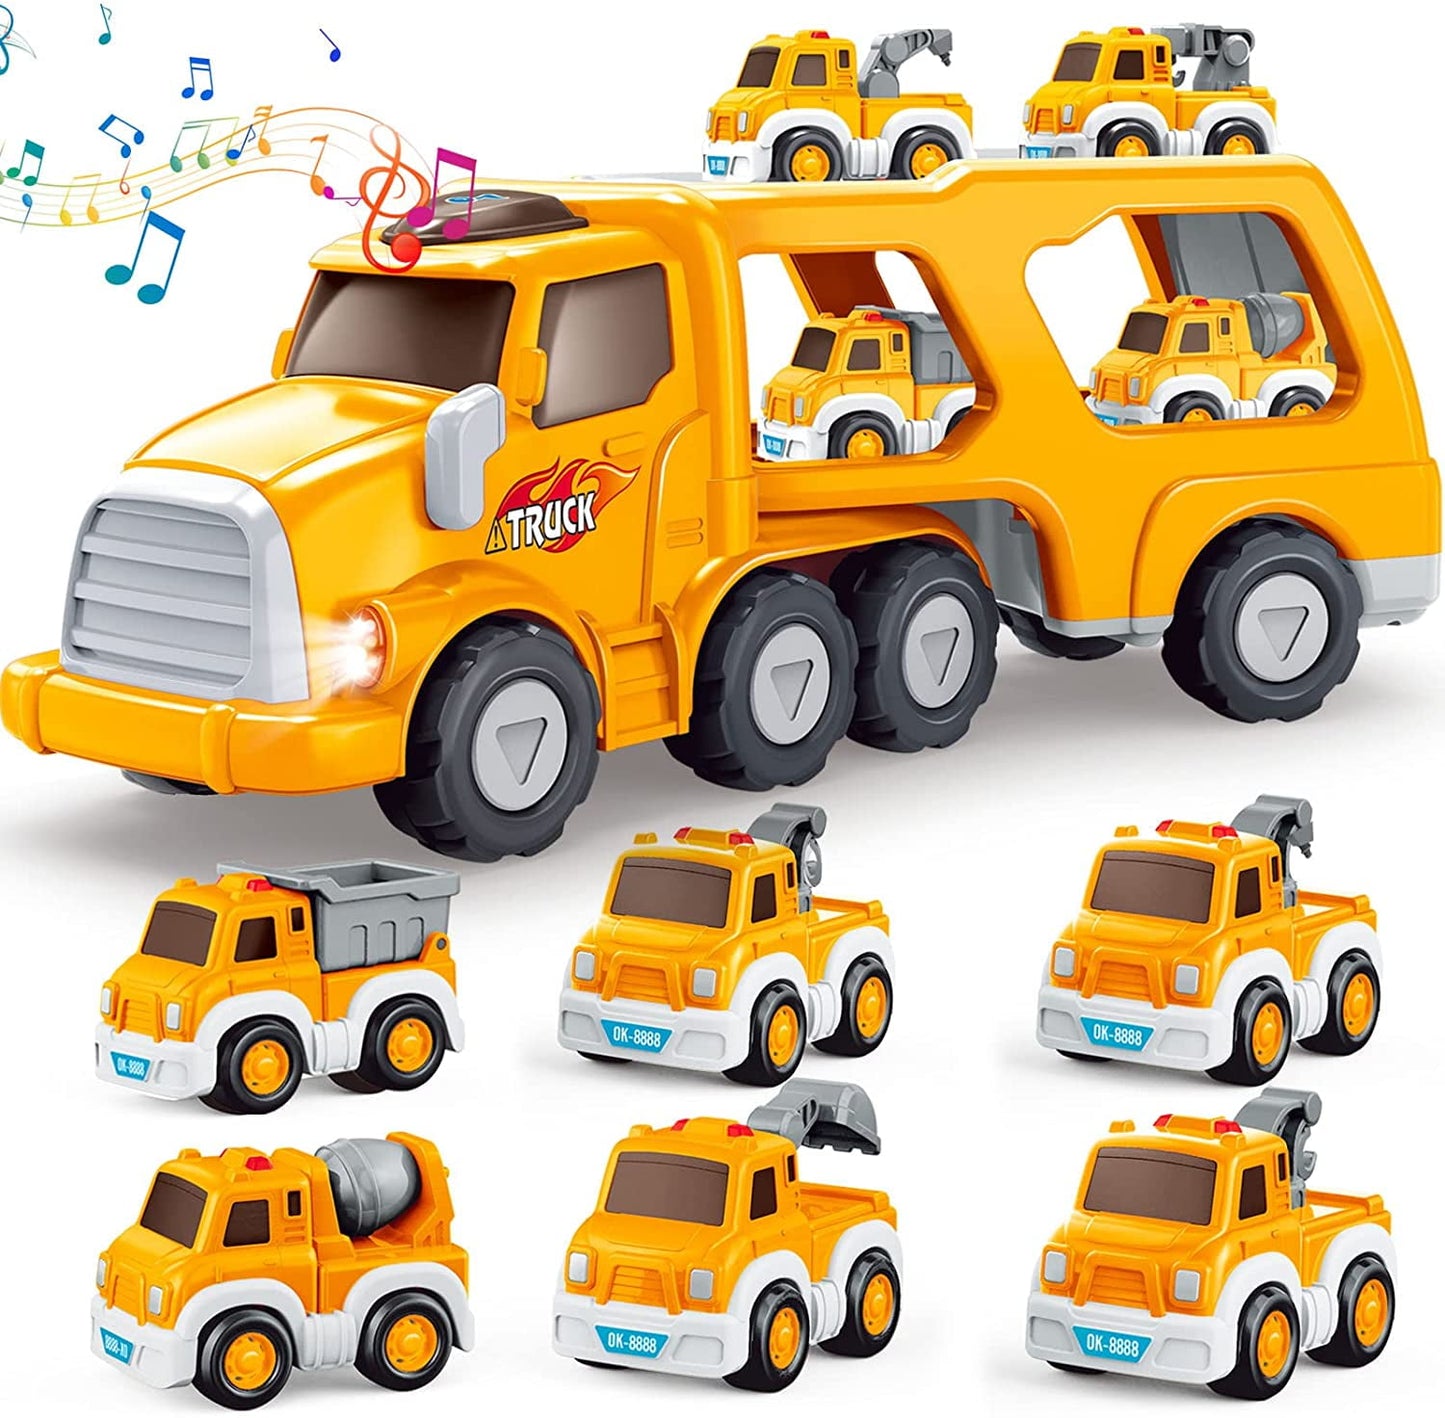 Toddler Boys Toy Trucks Car, Transport Vehicles Truck, Christmas Birthday Gifts for Boys 1-3 years old.